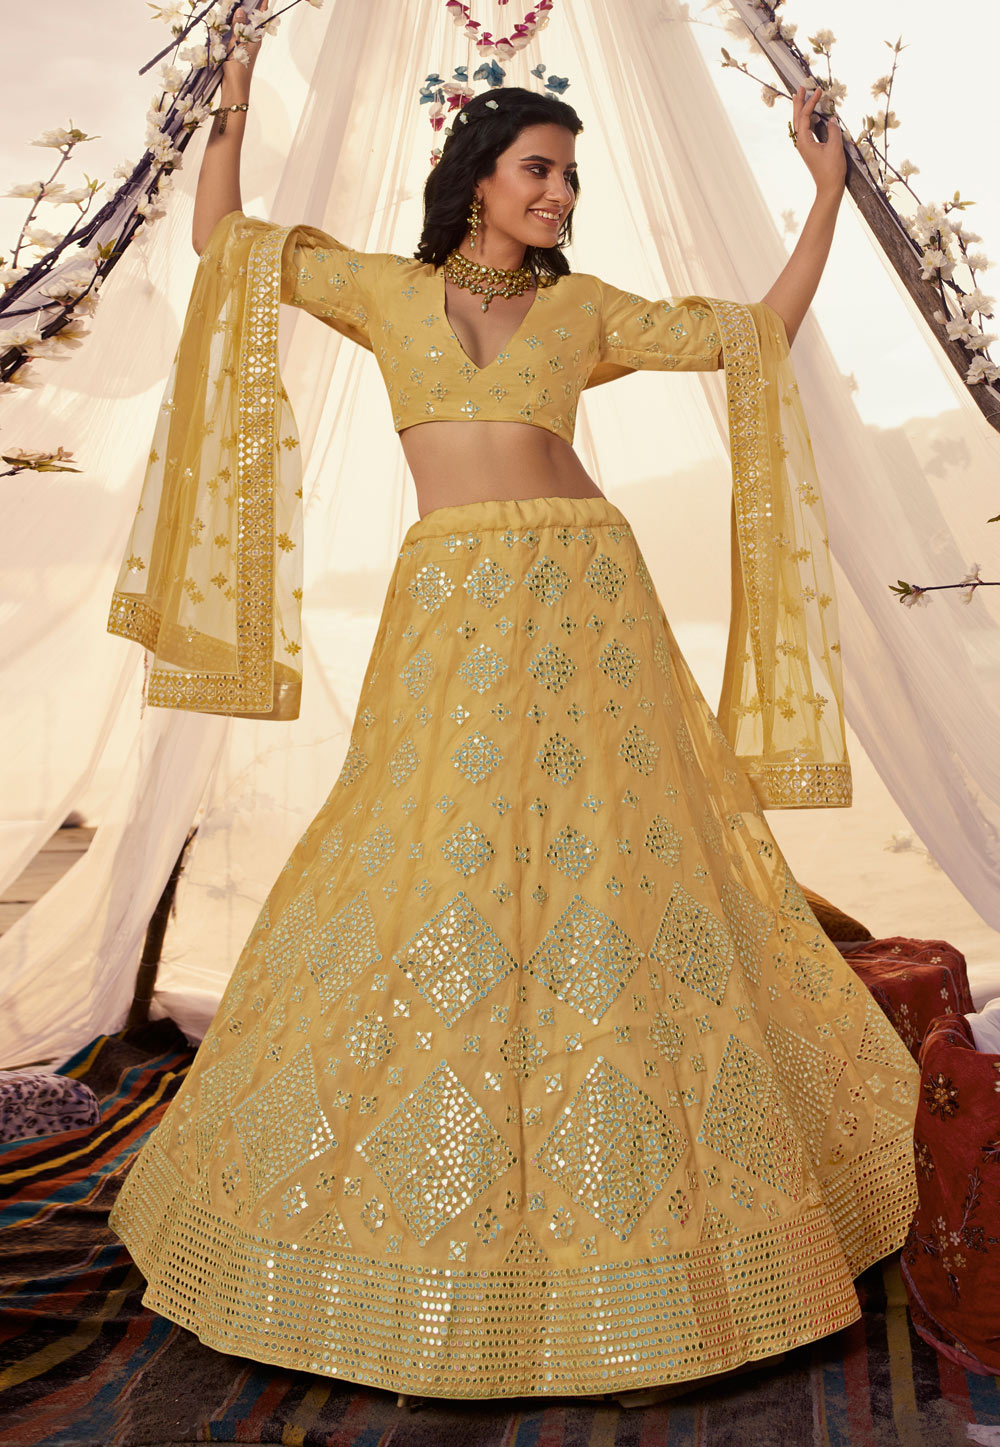 Which color of dupatta suits a yellow lehenga? - Quora